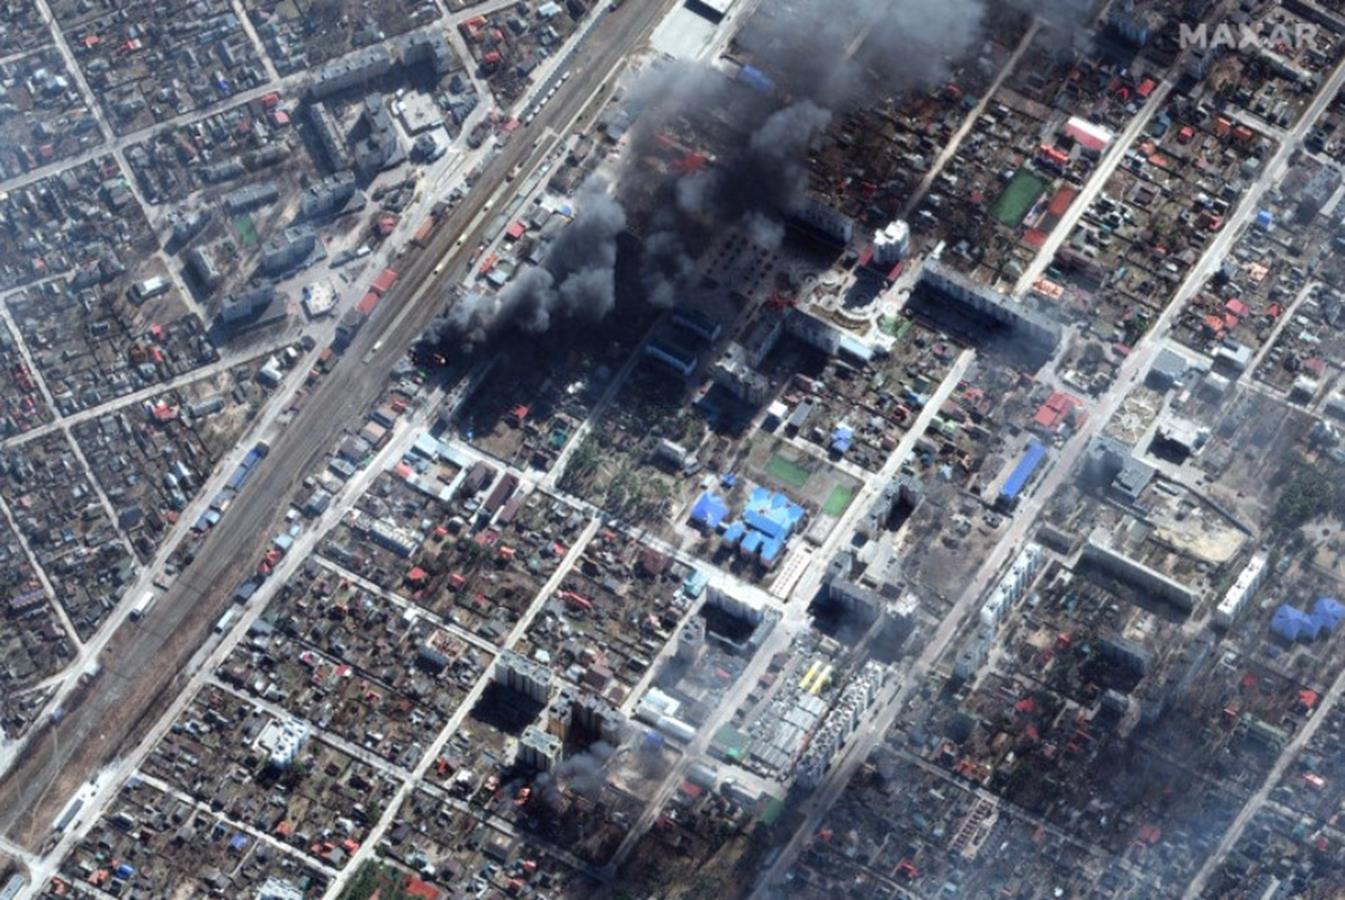 Ukraine in ruins.  The new satellite images of Mariupol are terrifying with the scale of the damage